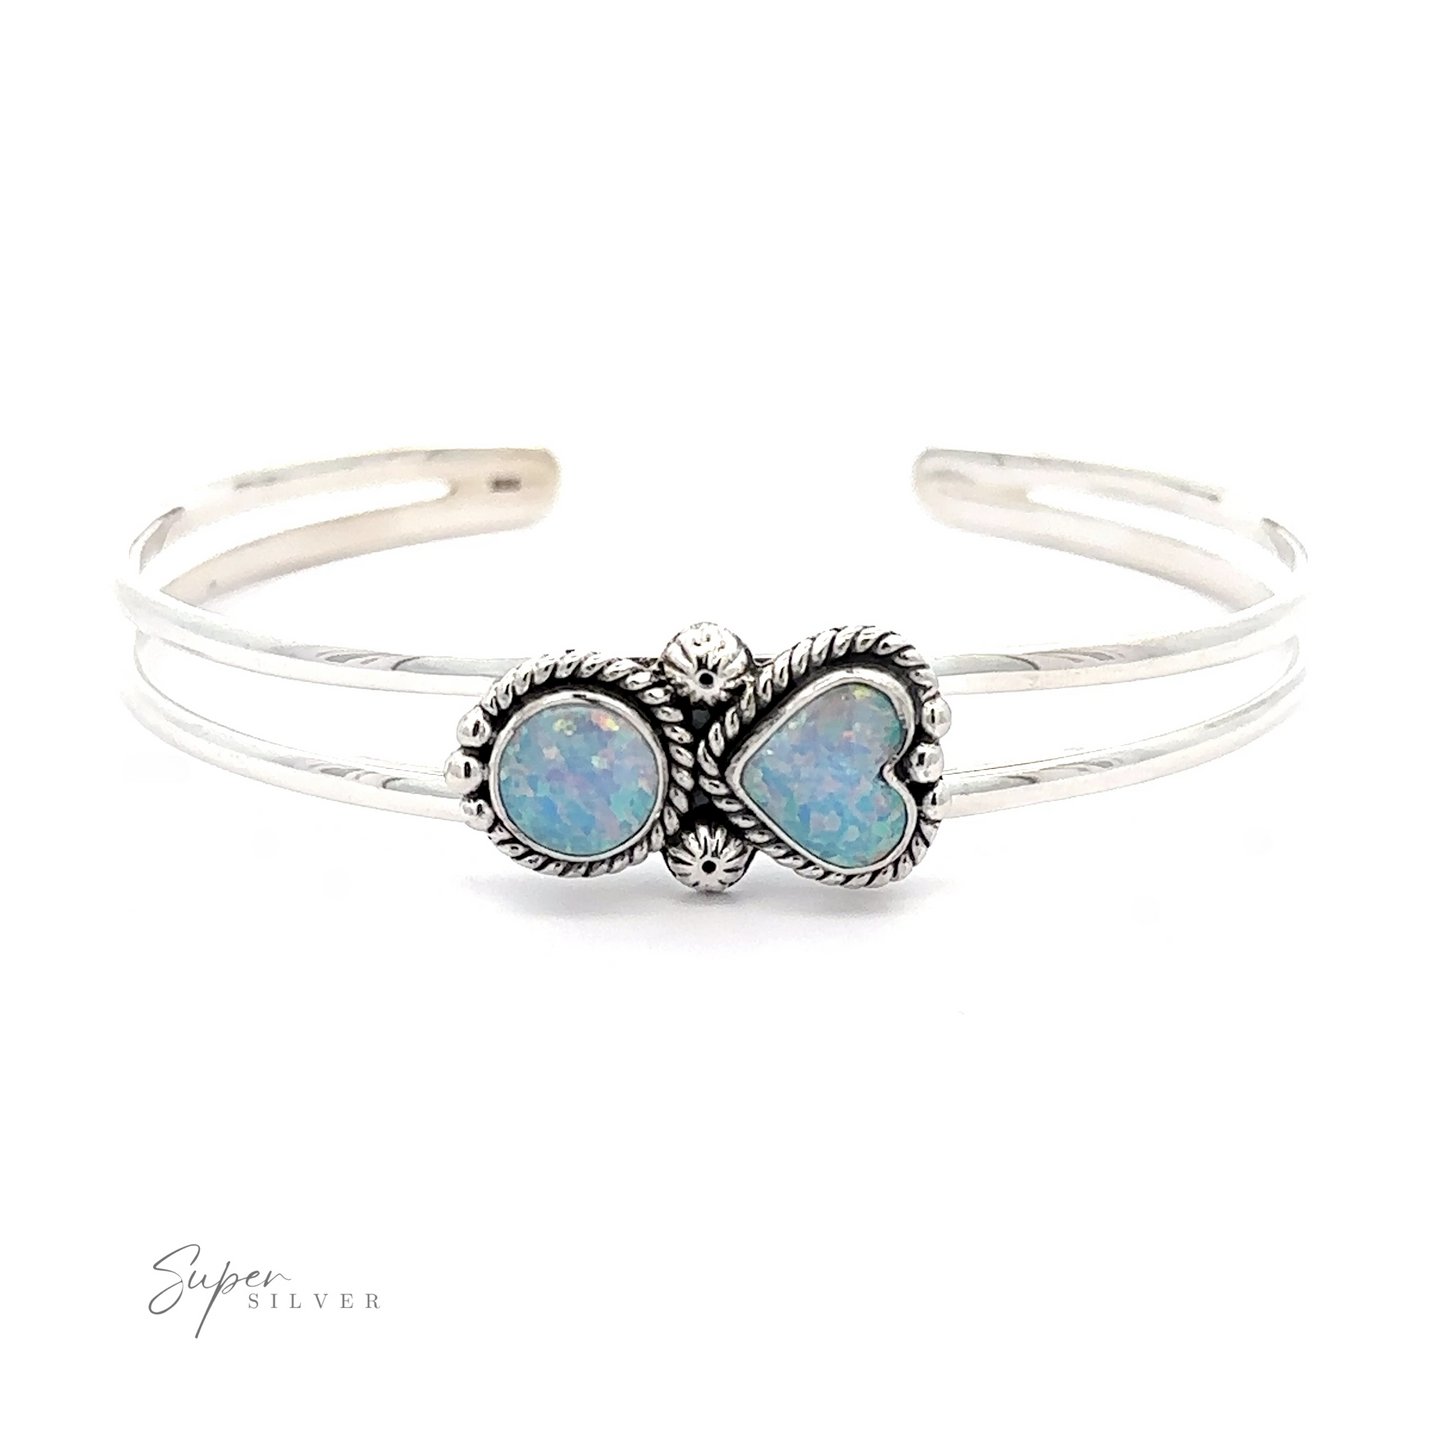 A Opal Heart And Circle Cuff Bracelet featuring two oval opal stones set in intricately designed bezels. The band is split into two parallel sections that merge at the settings, giving it a romantic jewelry appeal. Text reads "Super Silver" in the corner.